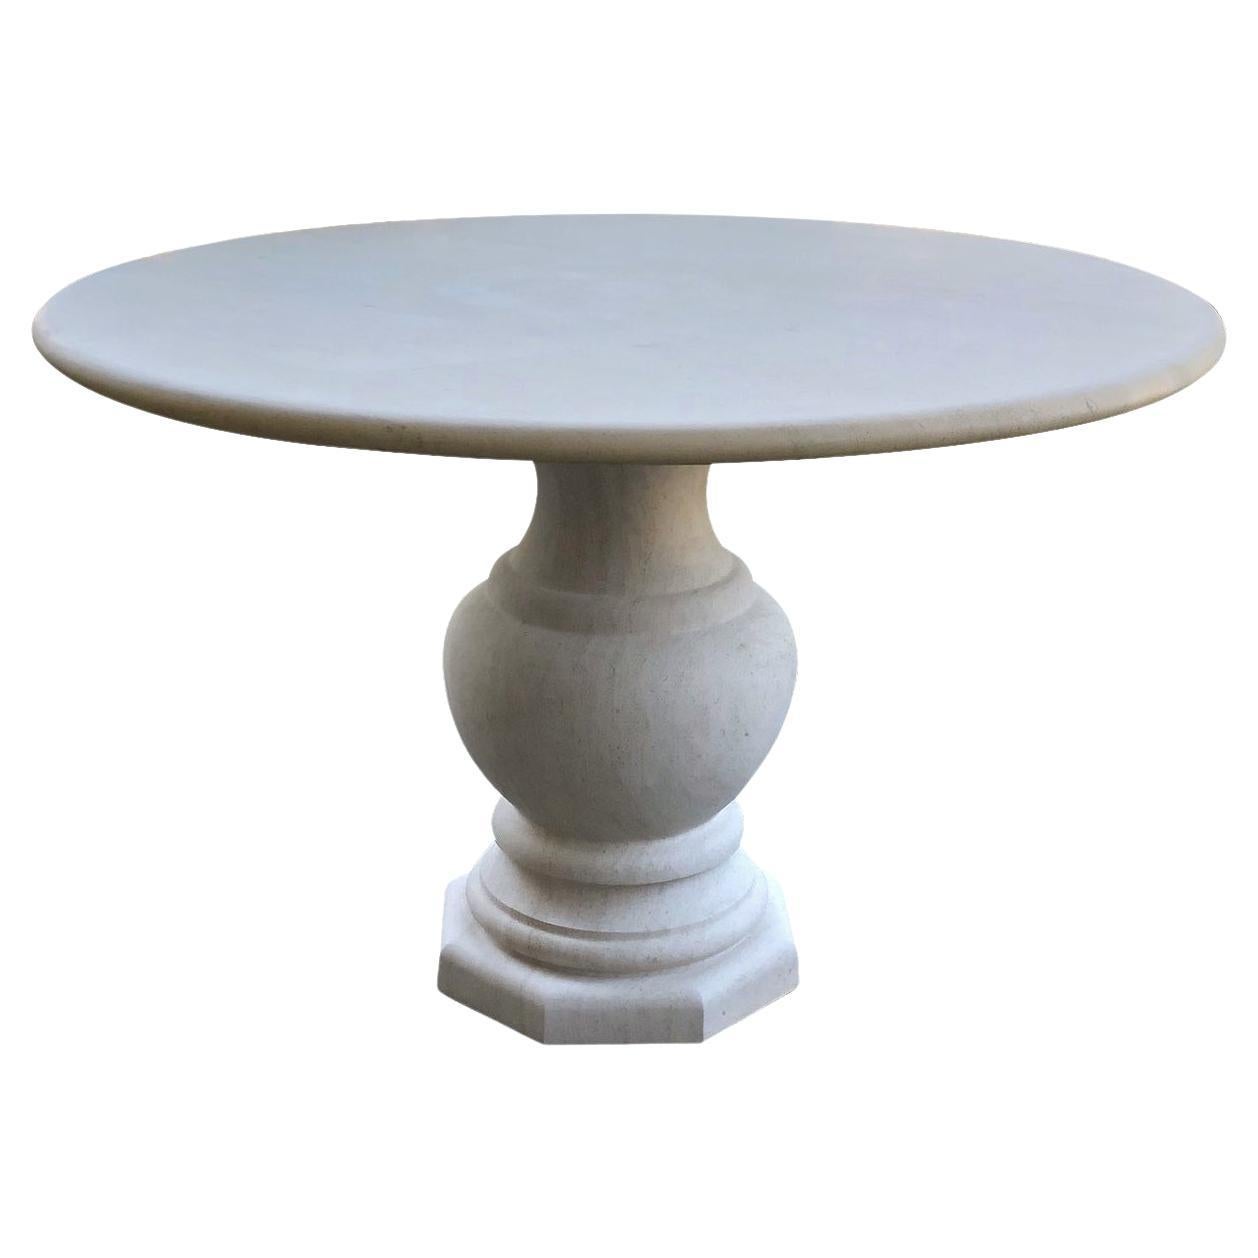 A French Carved Limestone Circular Center/Dining Table on a Baluster-form Base